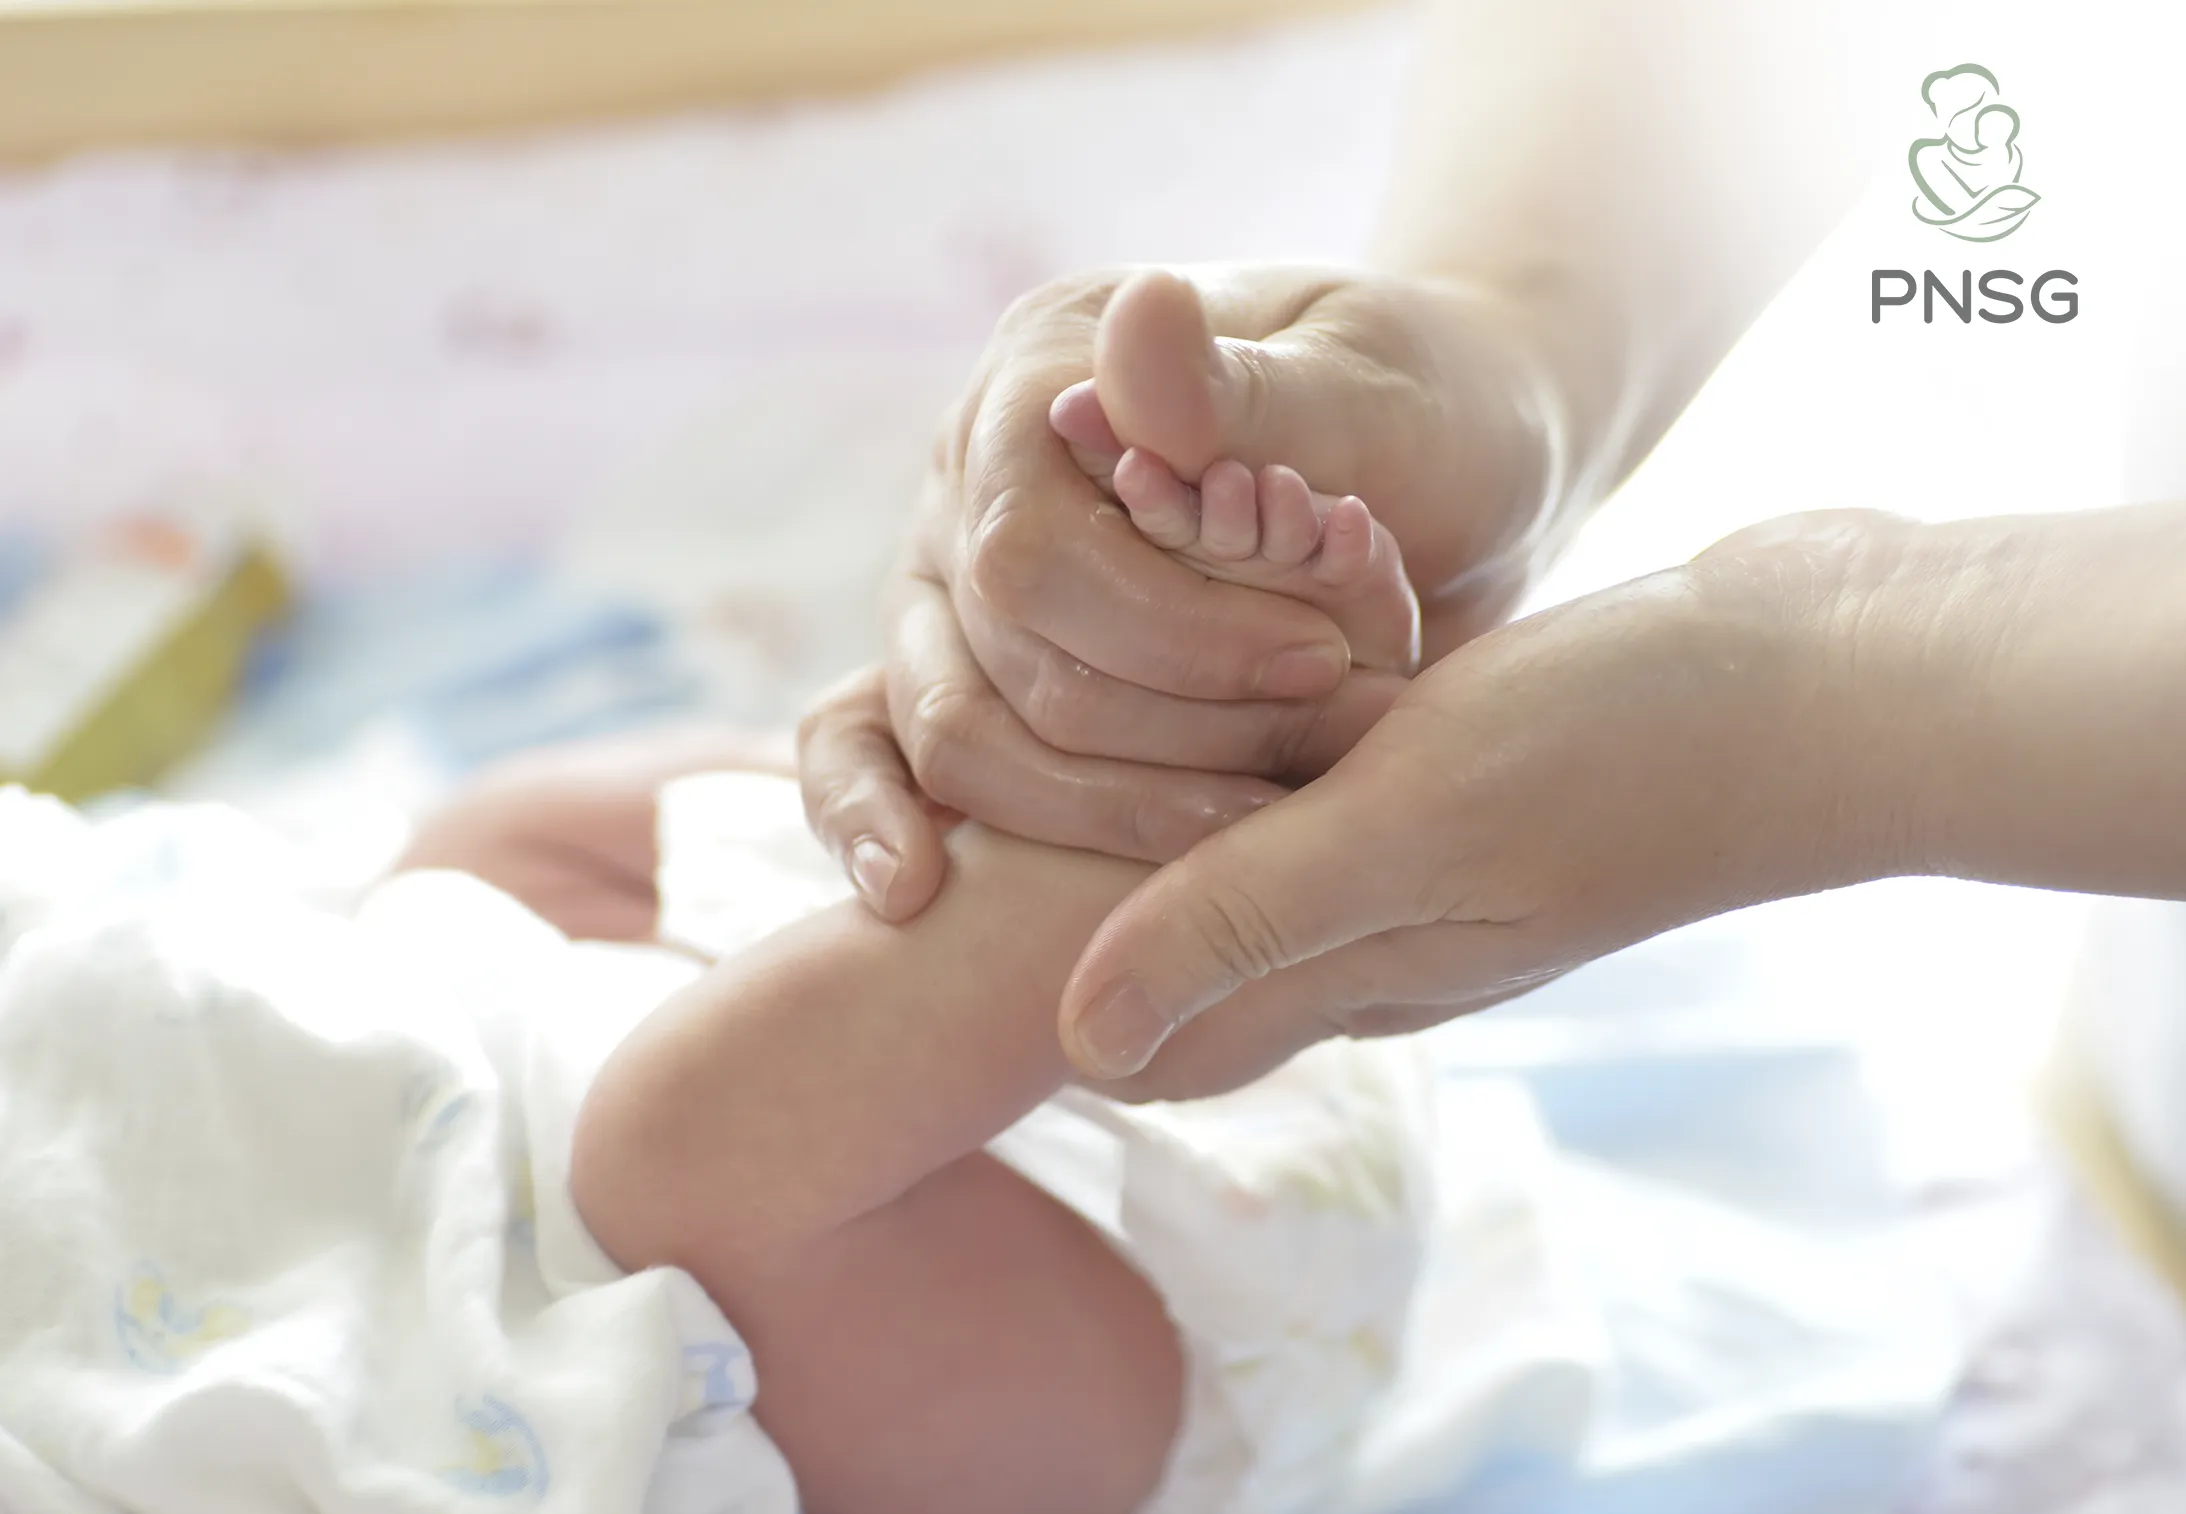 Newborn Massage: What to Know & How to Do It Safely -PNSG Singapore